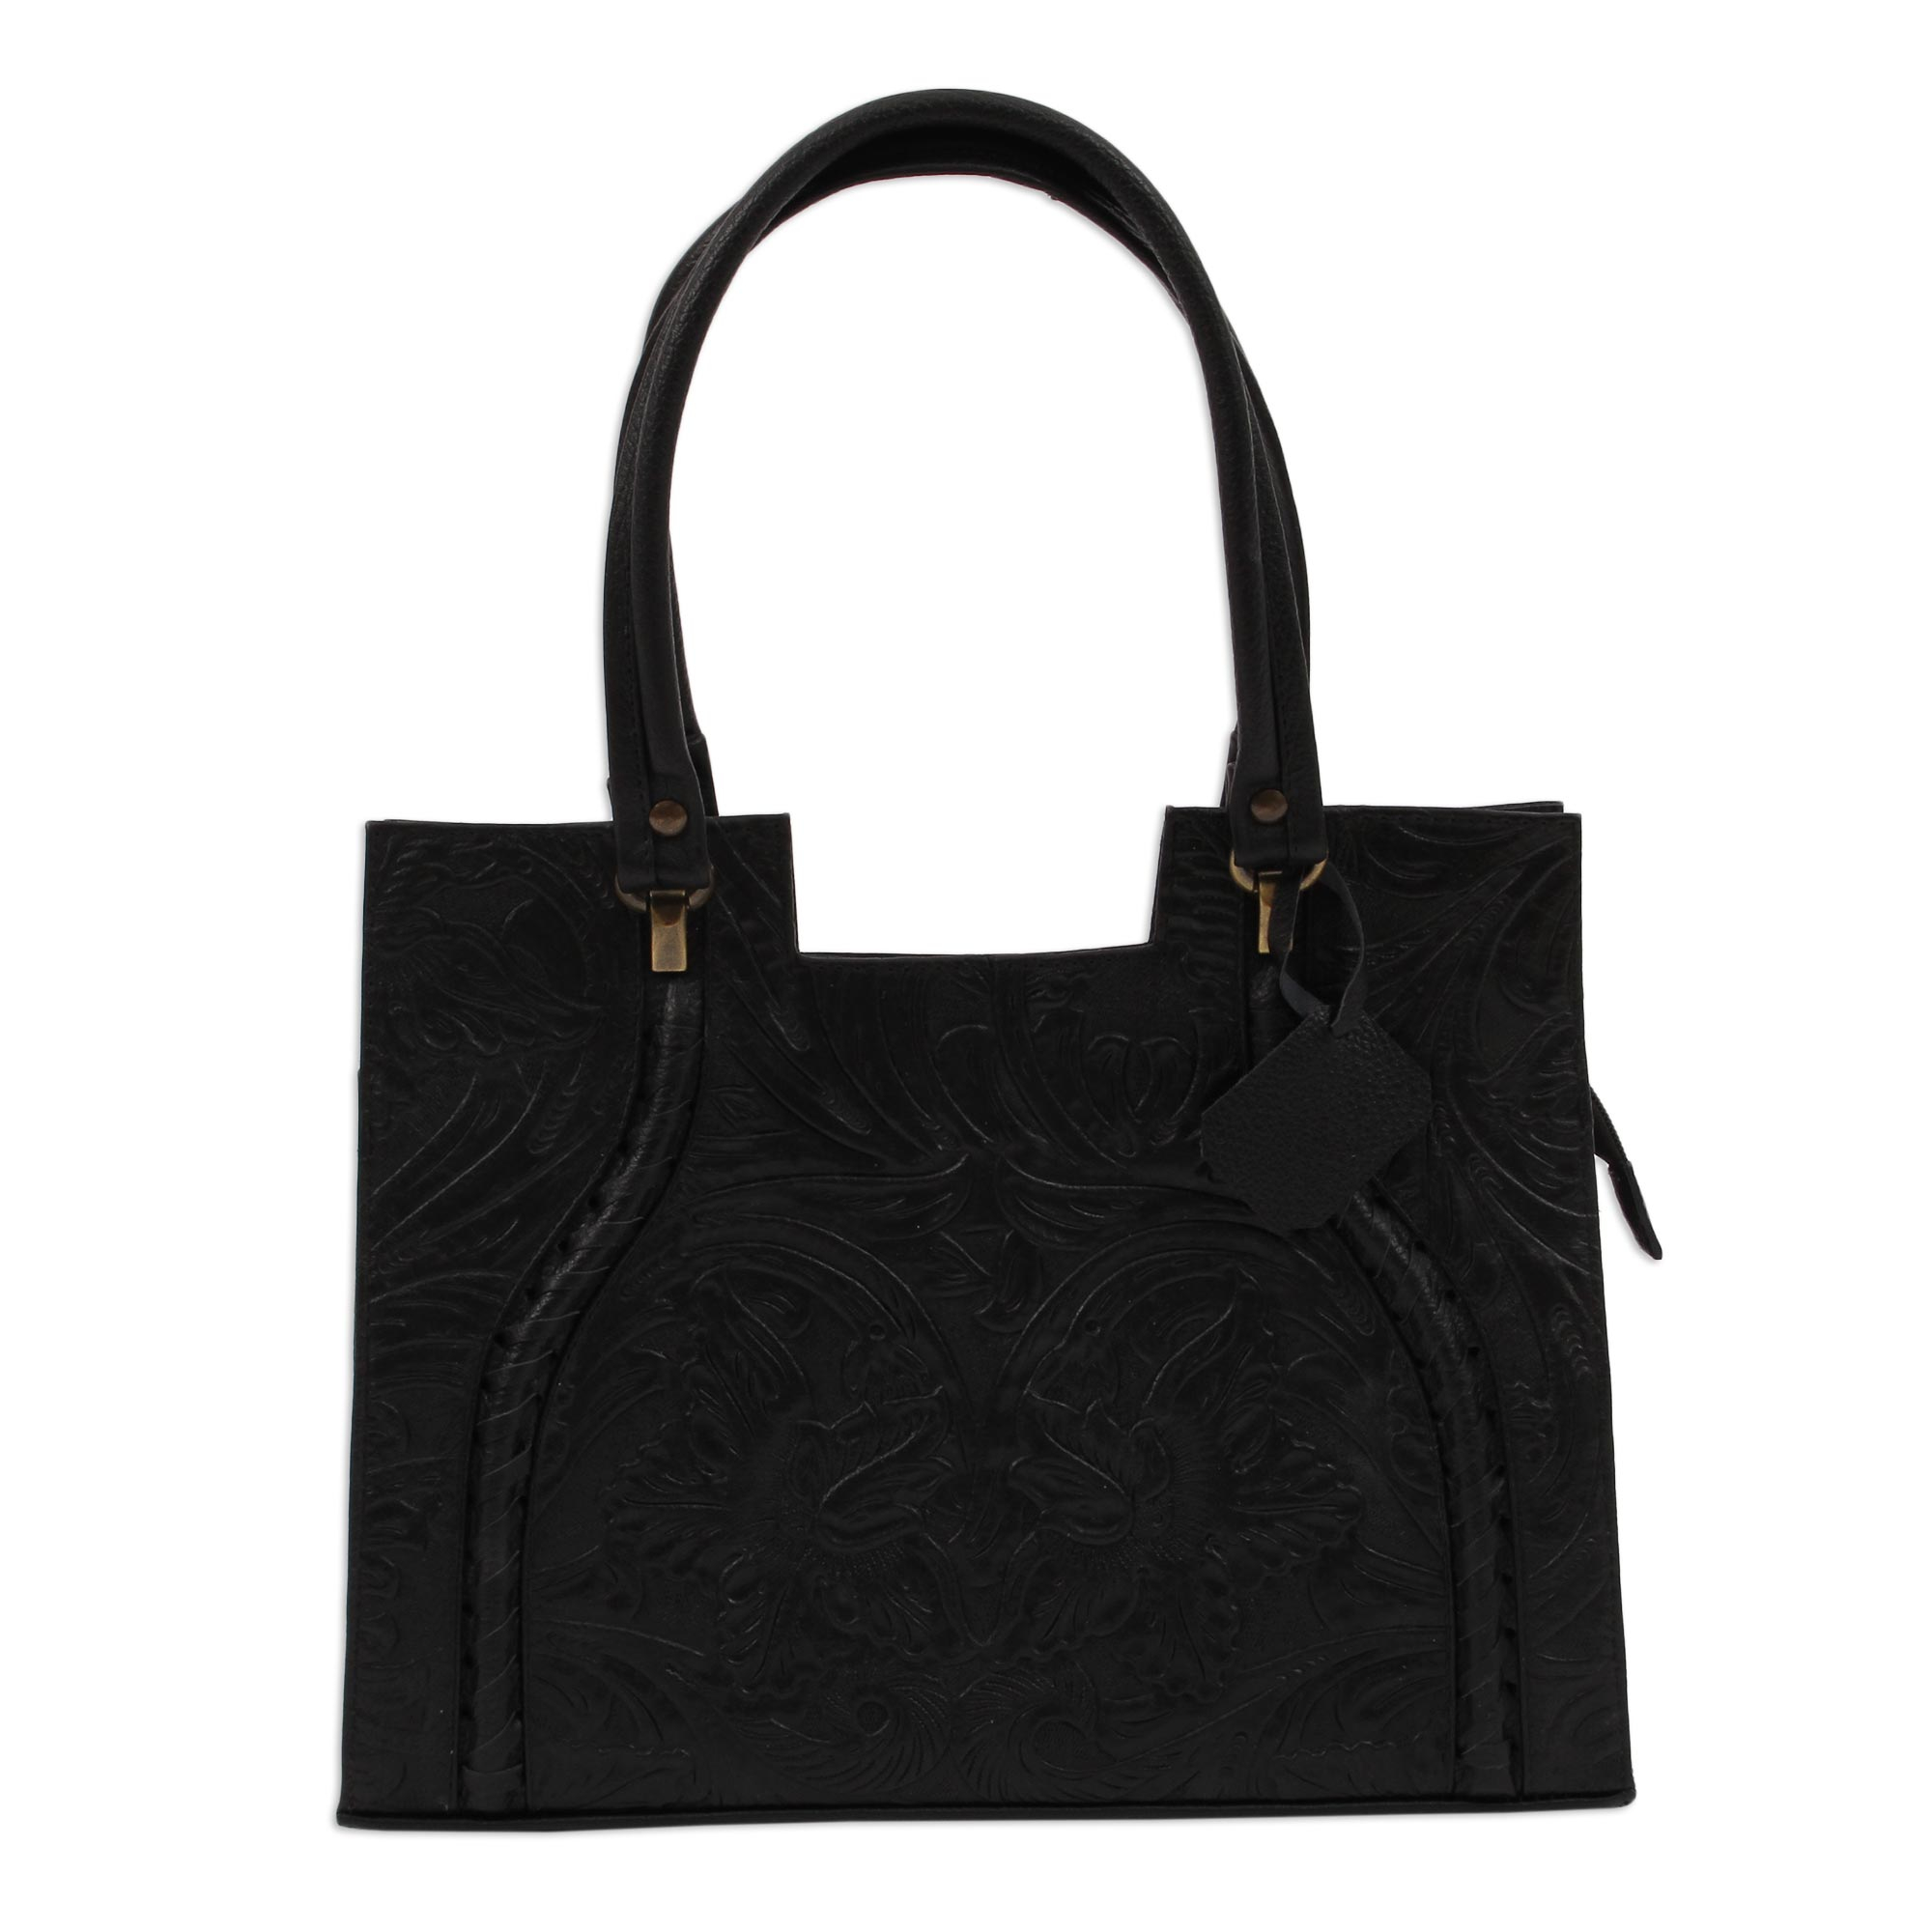 Handcrafted Black Embossed Leather Handbag from Mexico - Lush ...